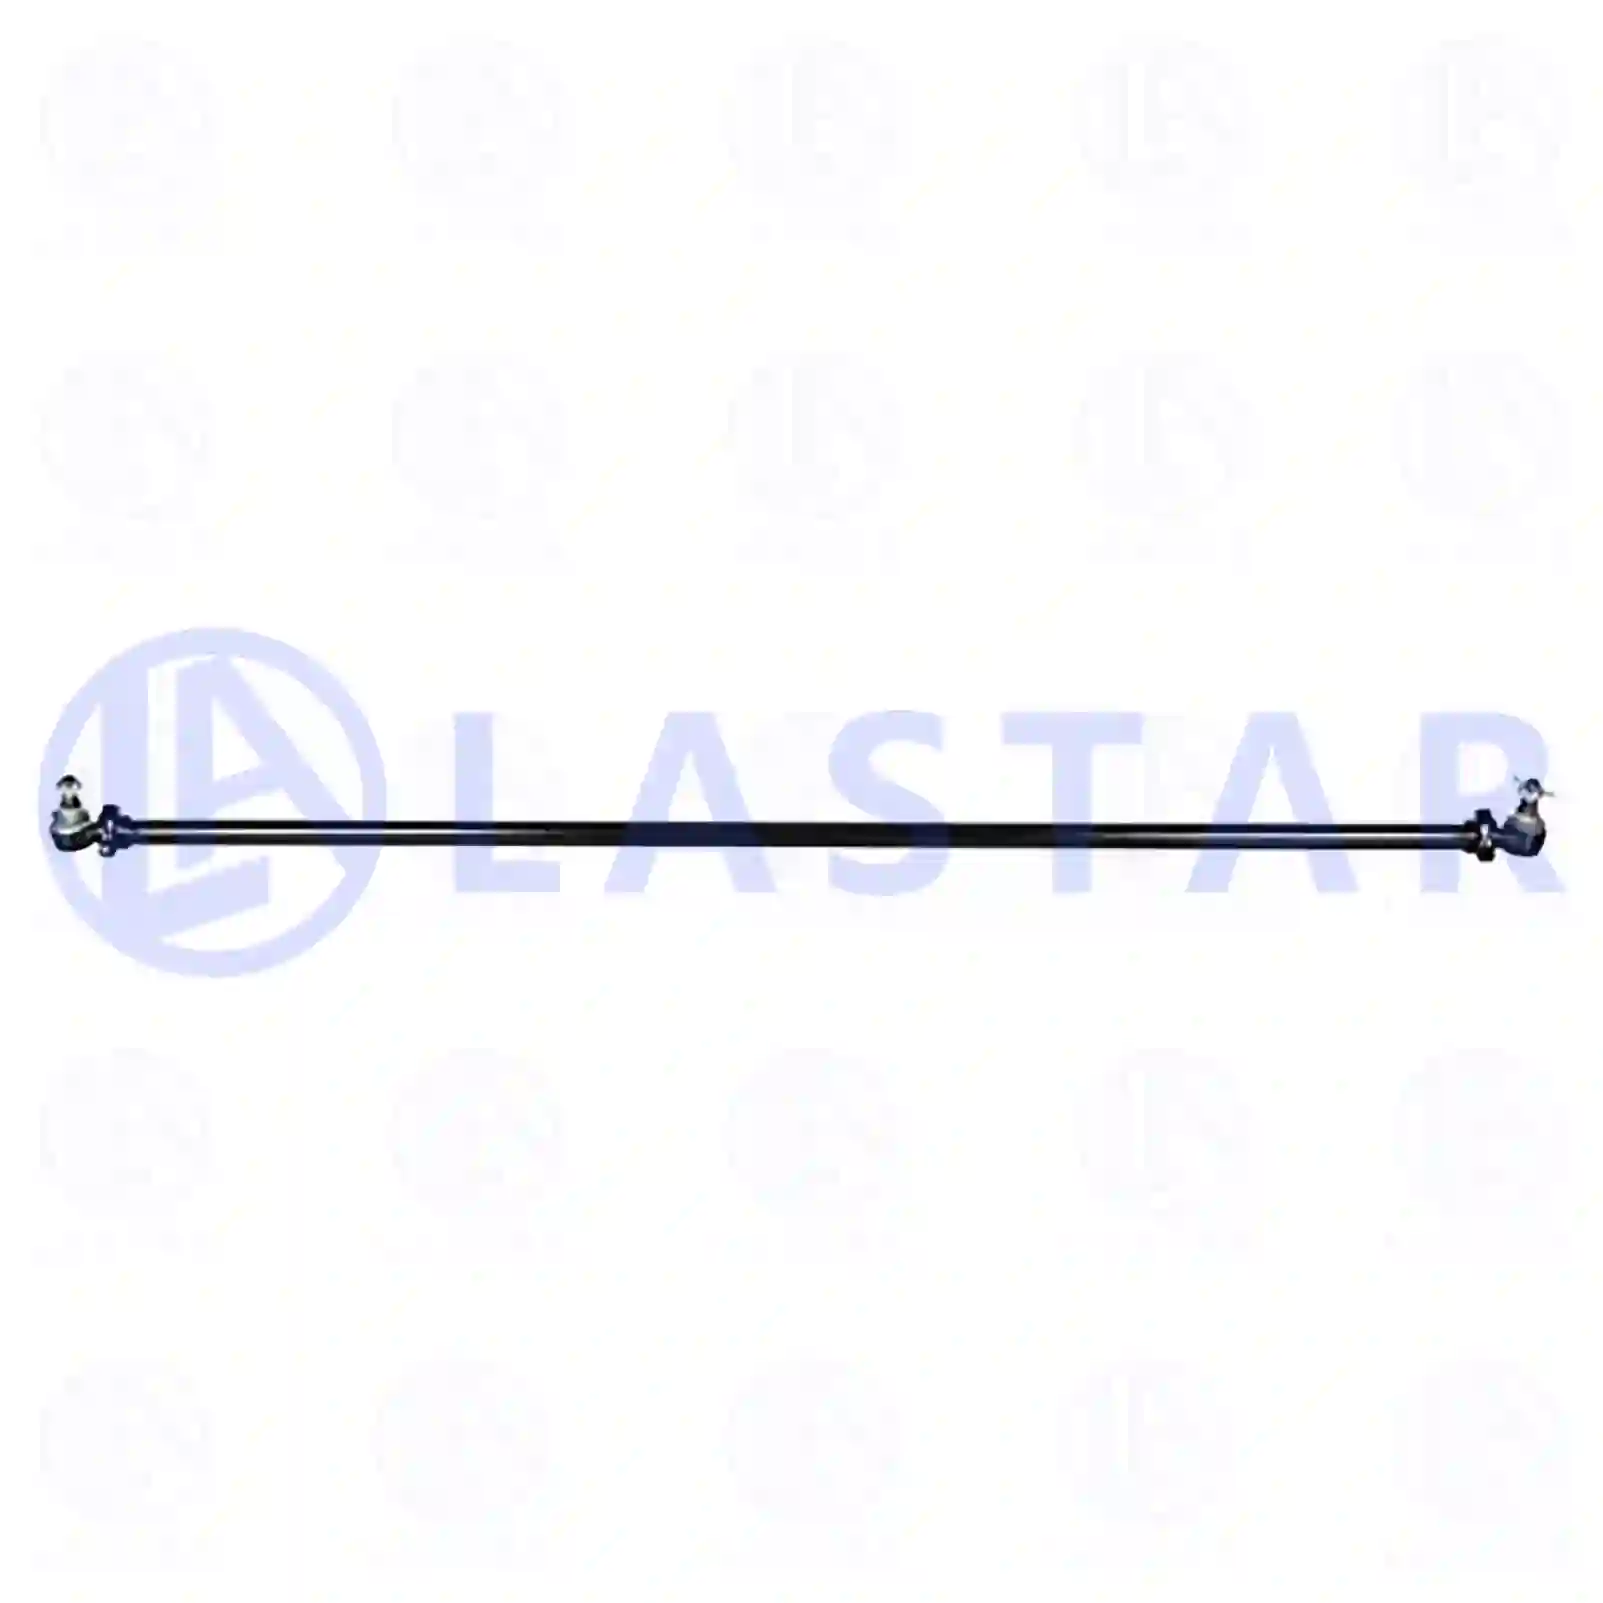 Track rod, 77730306, 81467106865, 81467106866, 81467116717, 81467116728, ||  77730306 Lastar Spare Part | Truck Spare Parts, Auotomotive Spare Parts Track rod, 77730306, 81467106865, 81467106866, 81467116717, 81467116728, ||  77730306 Lastar Spare Part | Truck Spare Parts, Auotomotive Spare Parts